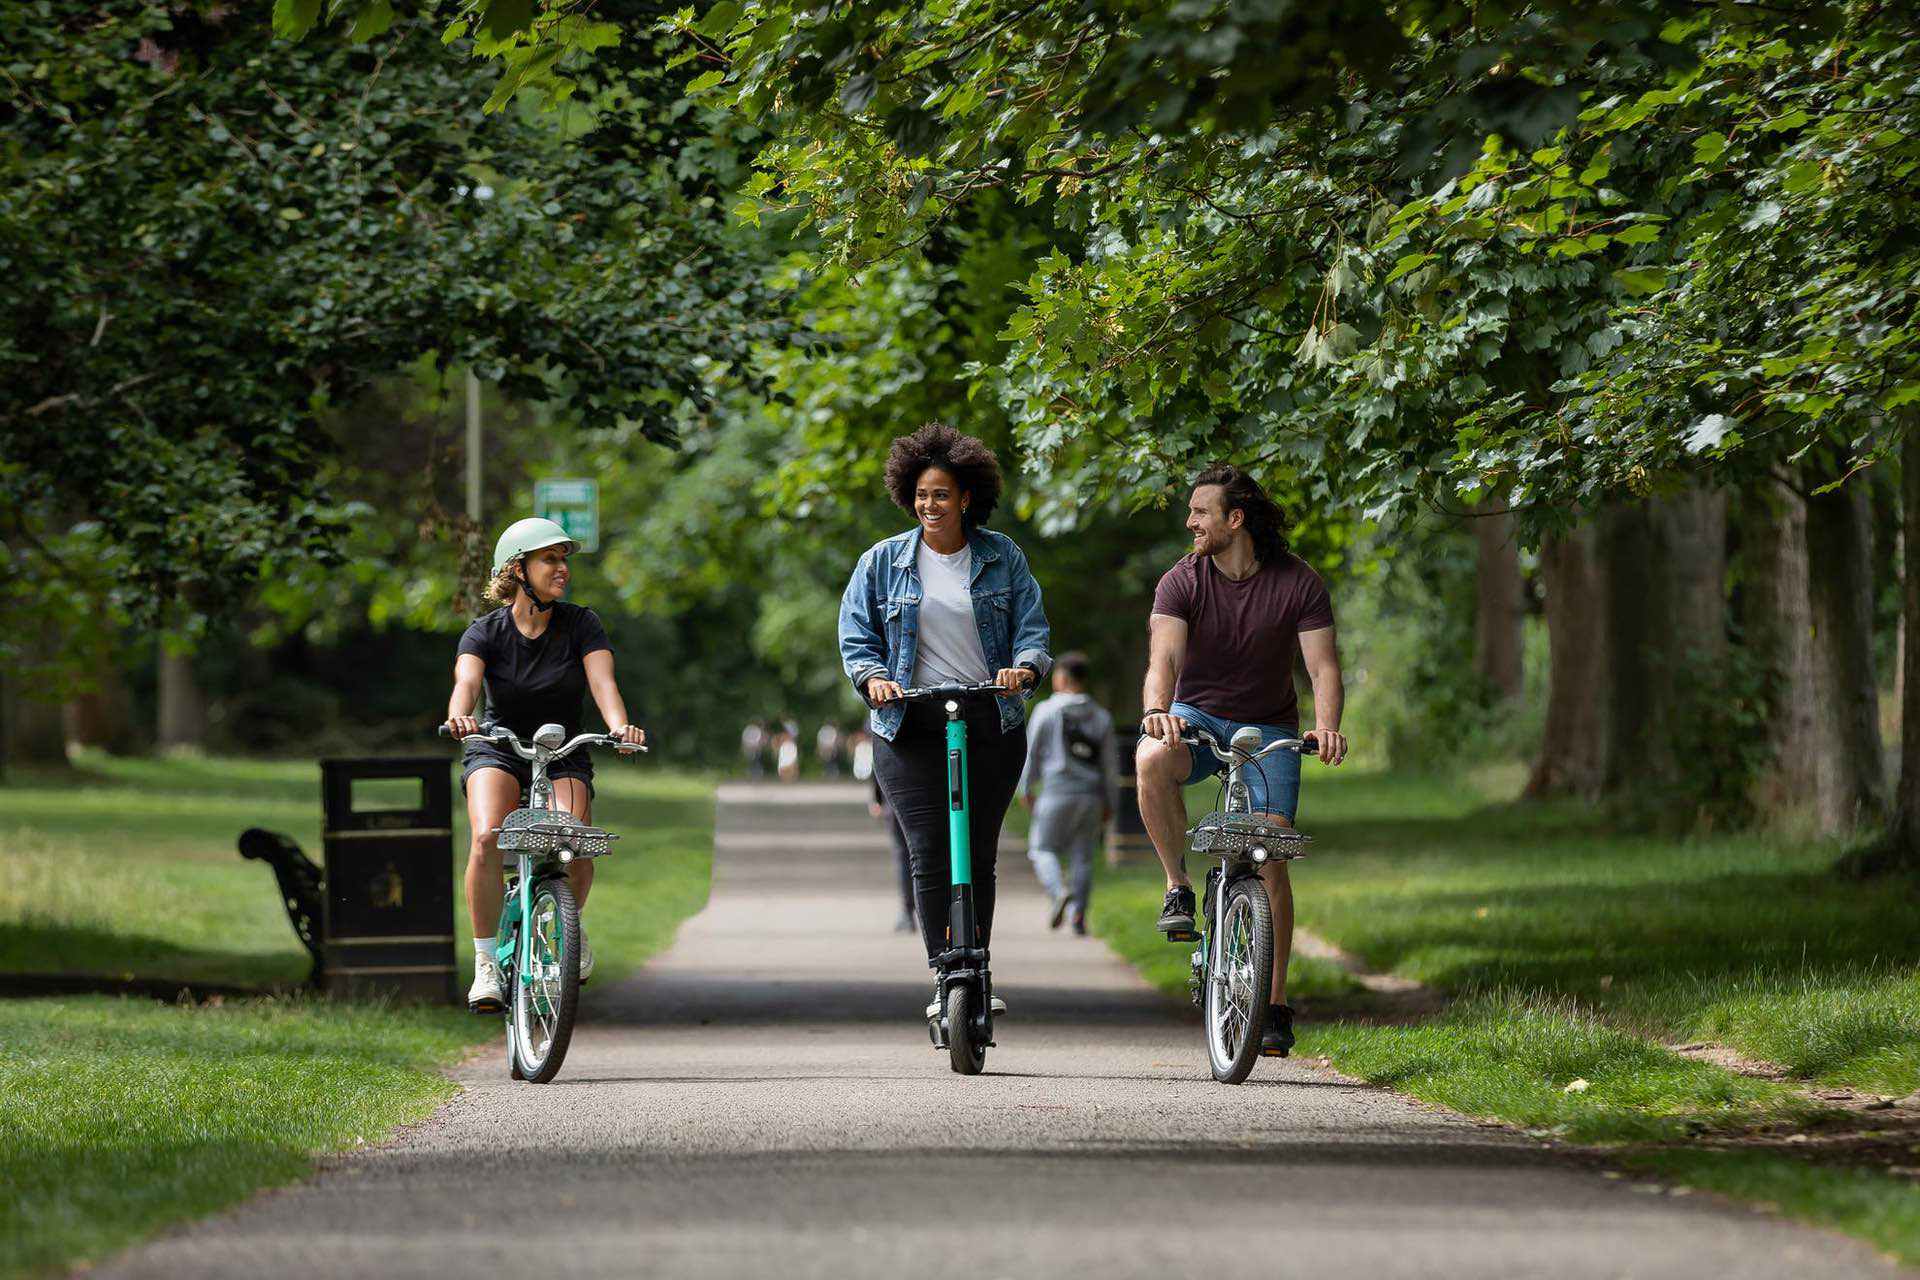 Woman rides her electric scooter through park with two friends on bicycles